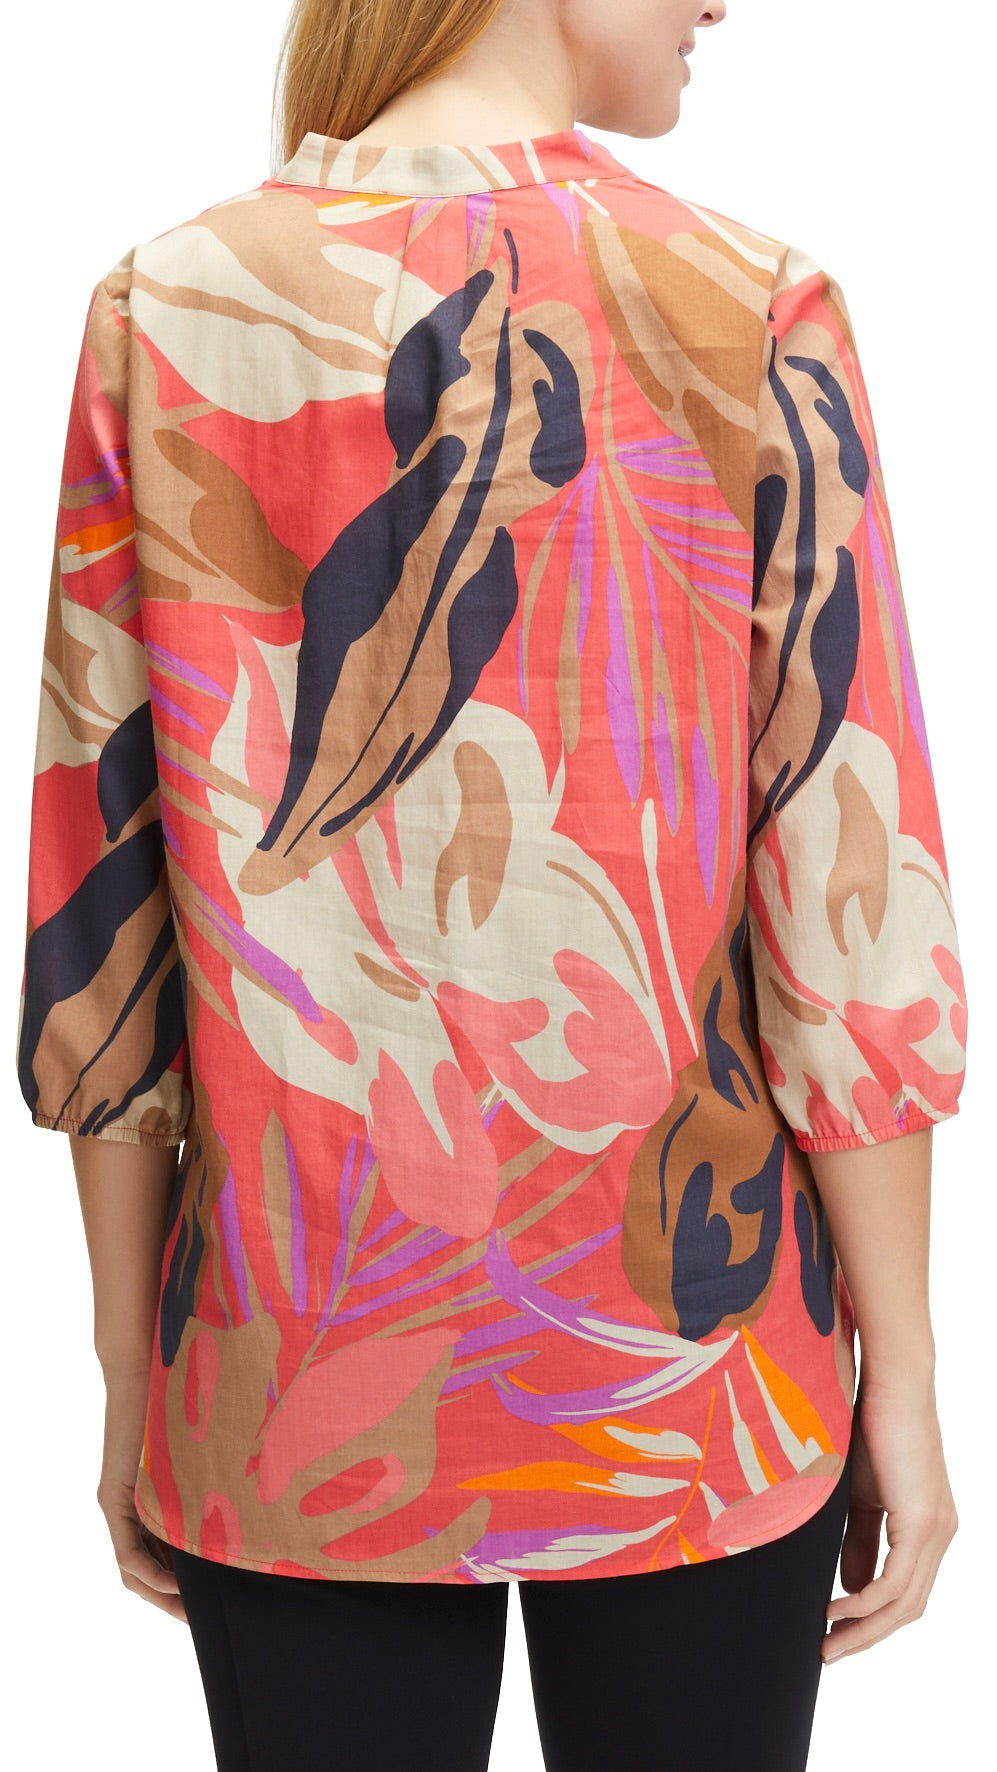 BLOUSE IMPRIMEE TROPICAL BETTY BARCLAY 8680 2462